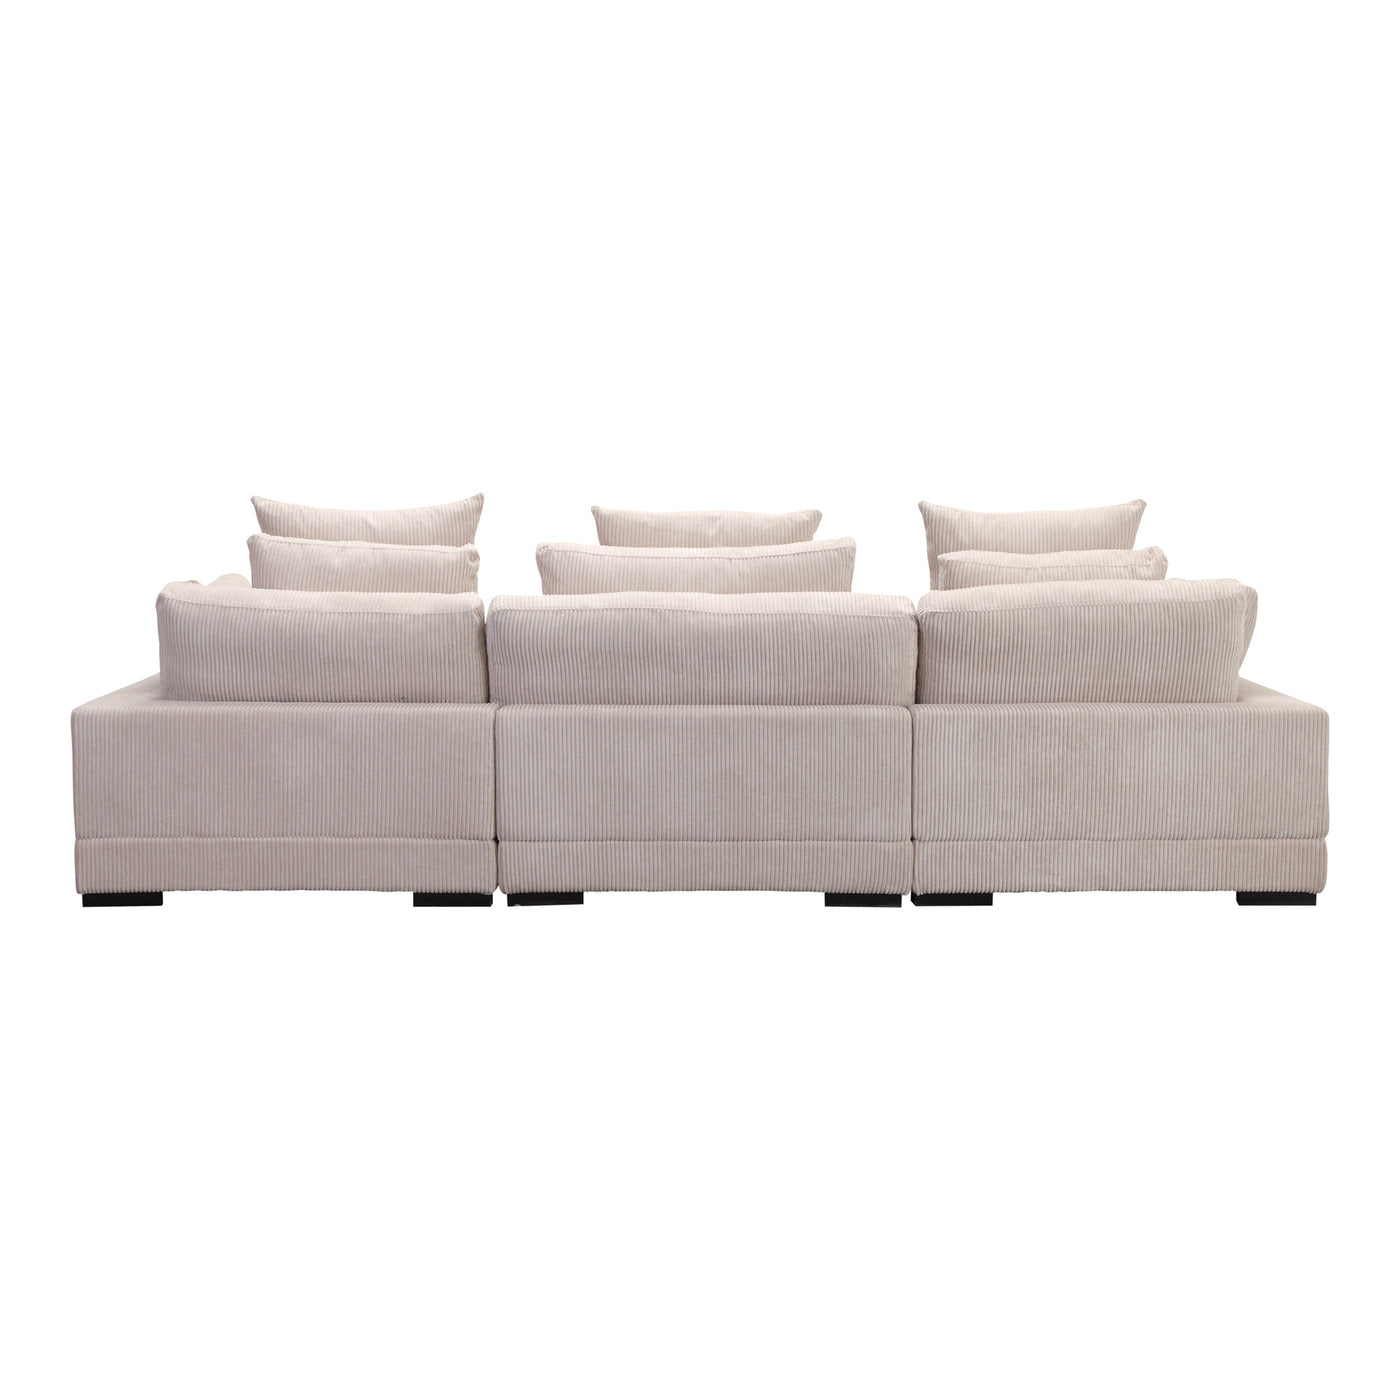 Seriously comfortable, seriously stylish. Either at home or in your commercial space, you can get cozier & cushier using f...